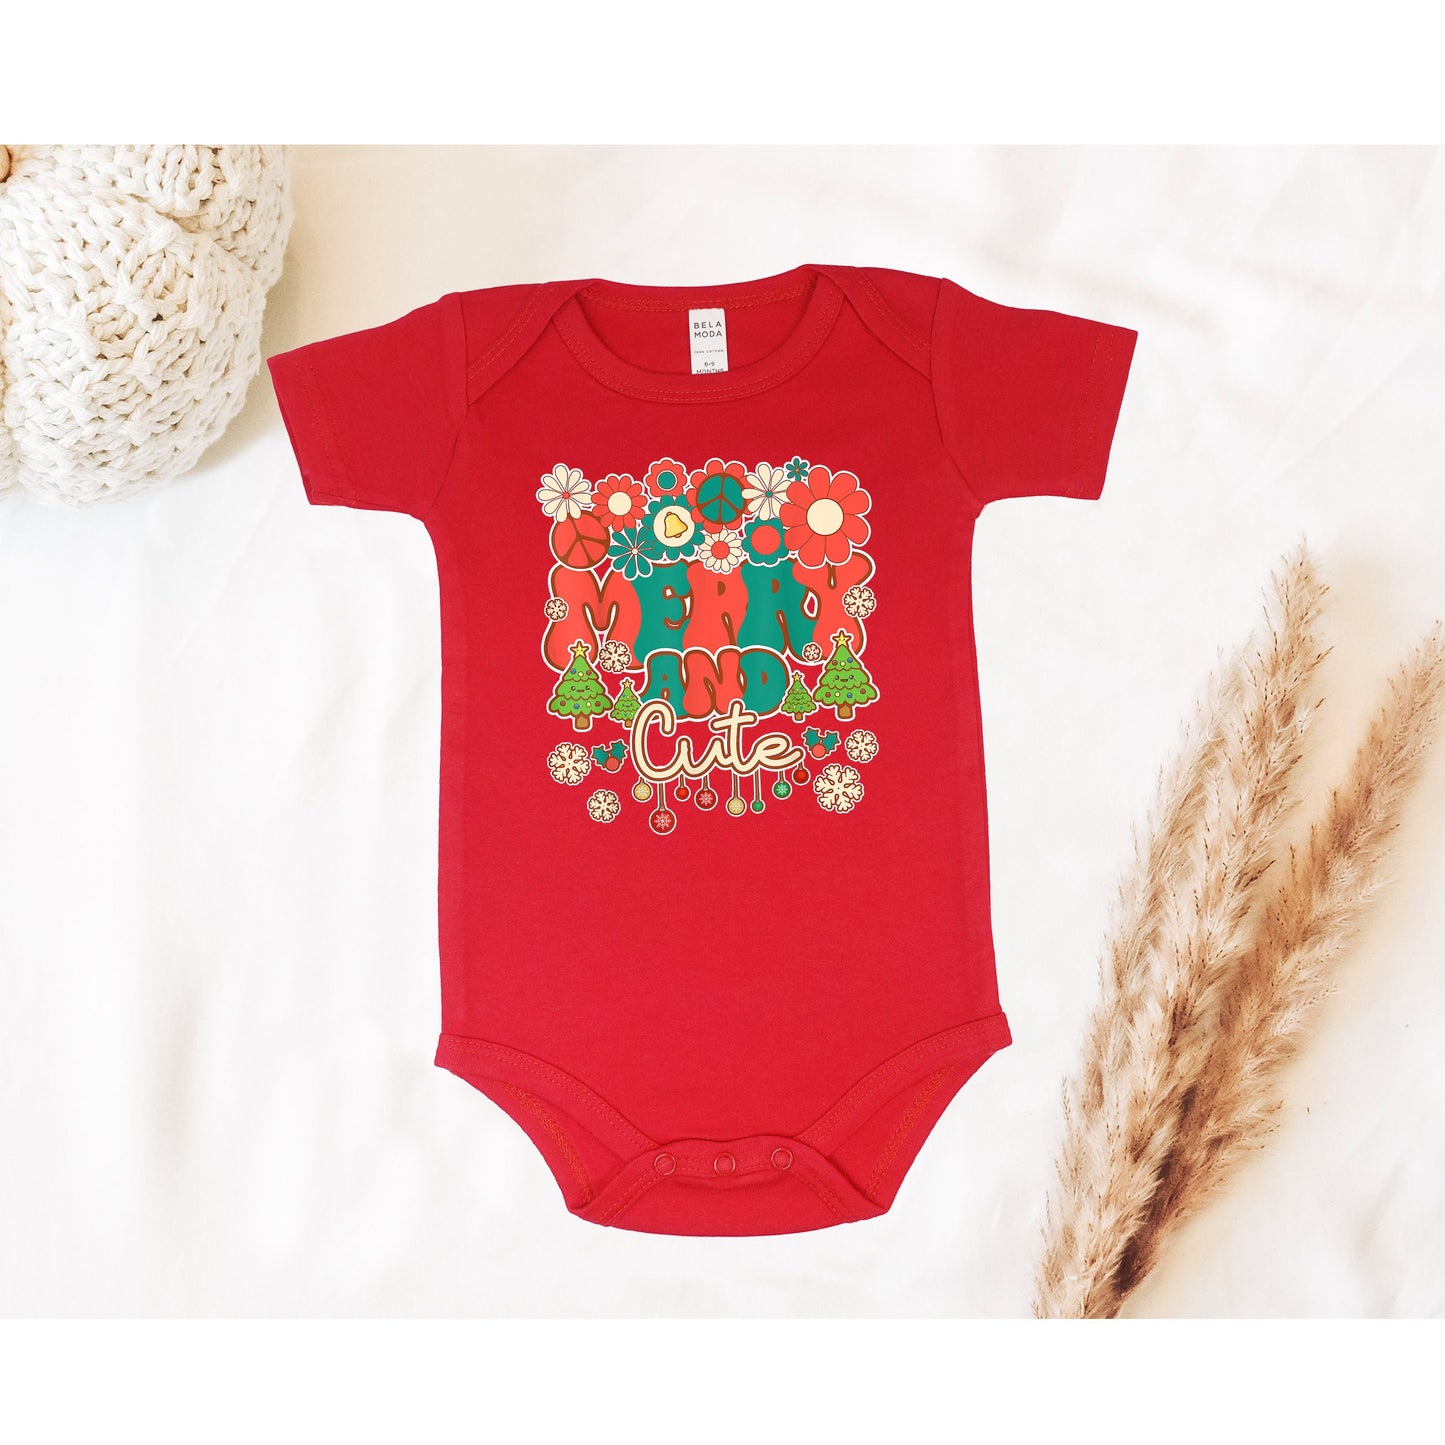 Merry and Cute Baby's Christmas, Baby Christmas Bodysuit, Christmas Baby Outfit, First Christmas Baby Outfit